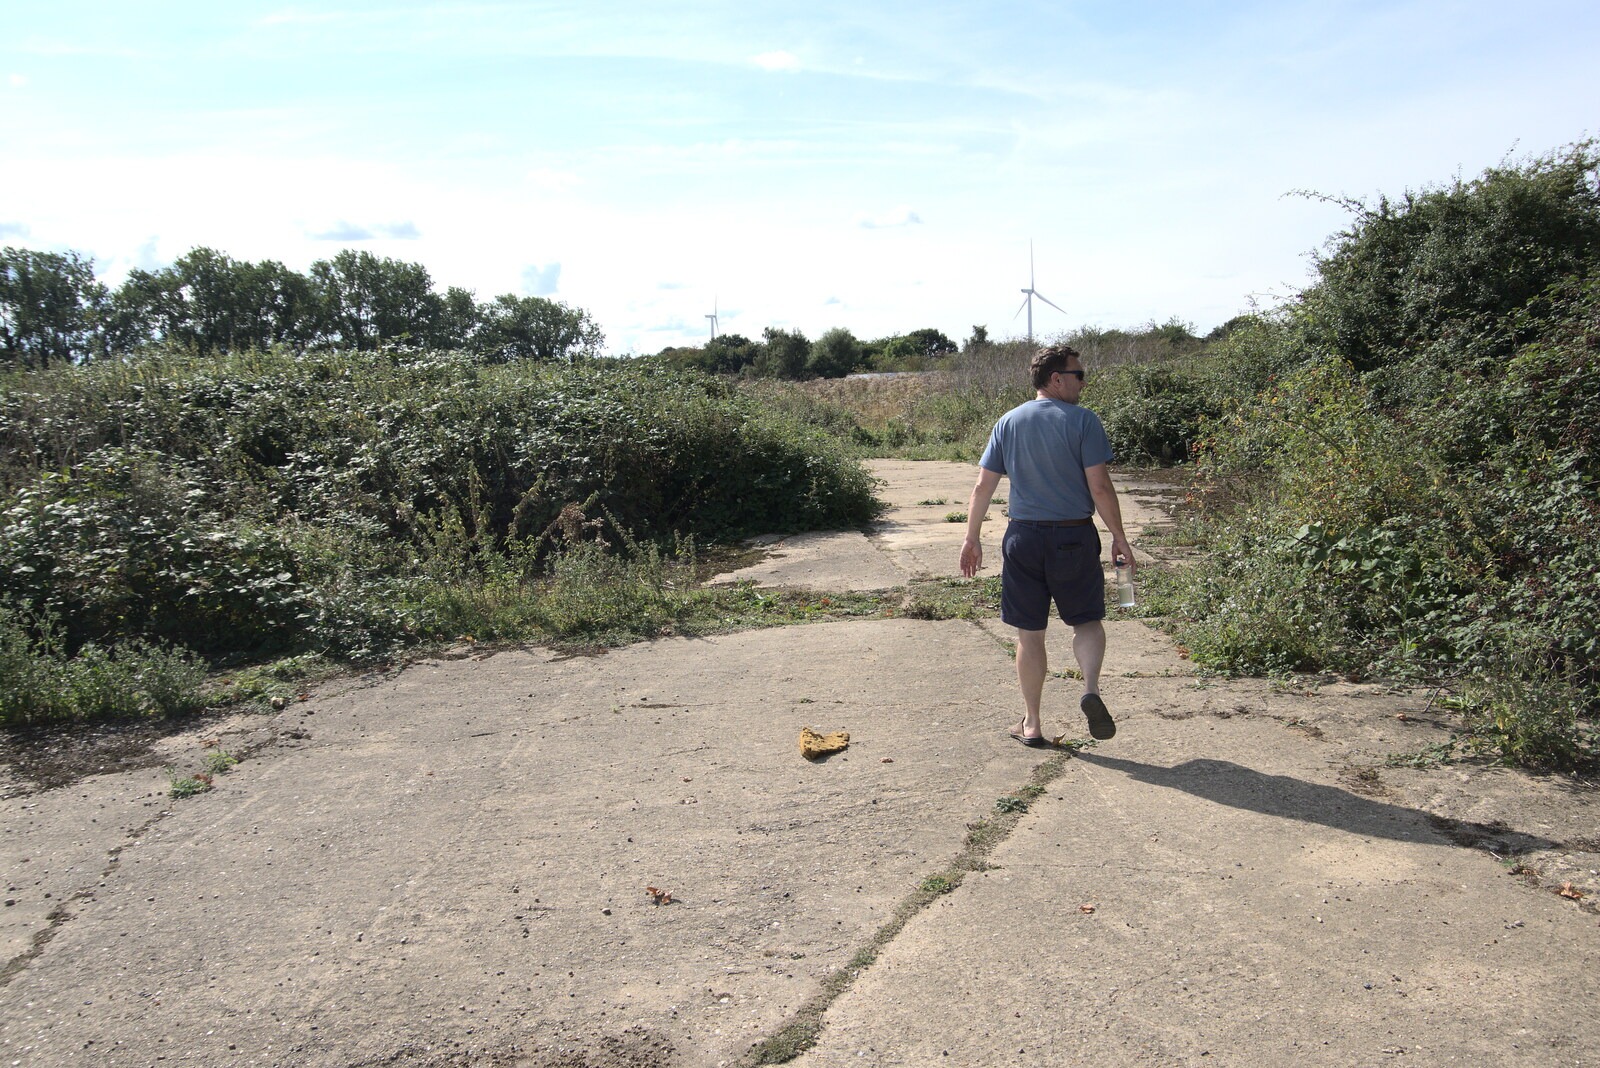 Clive checks out where one of the mess halls was from A Summer Party and an Airfield Walk with Clive, Brome, Suffolk - 11th September 2021